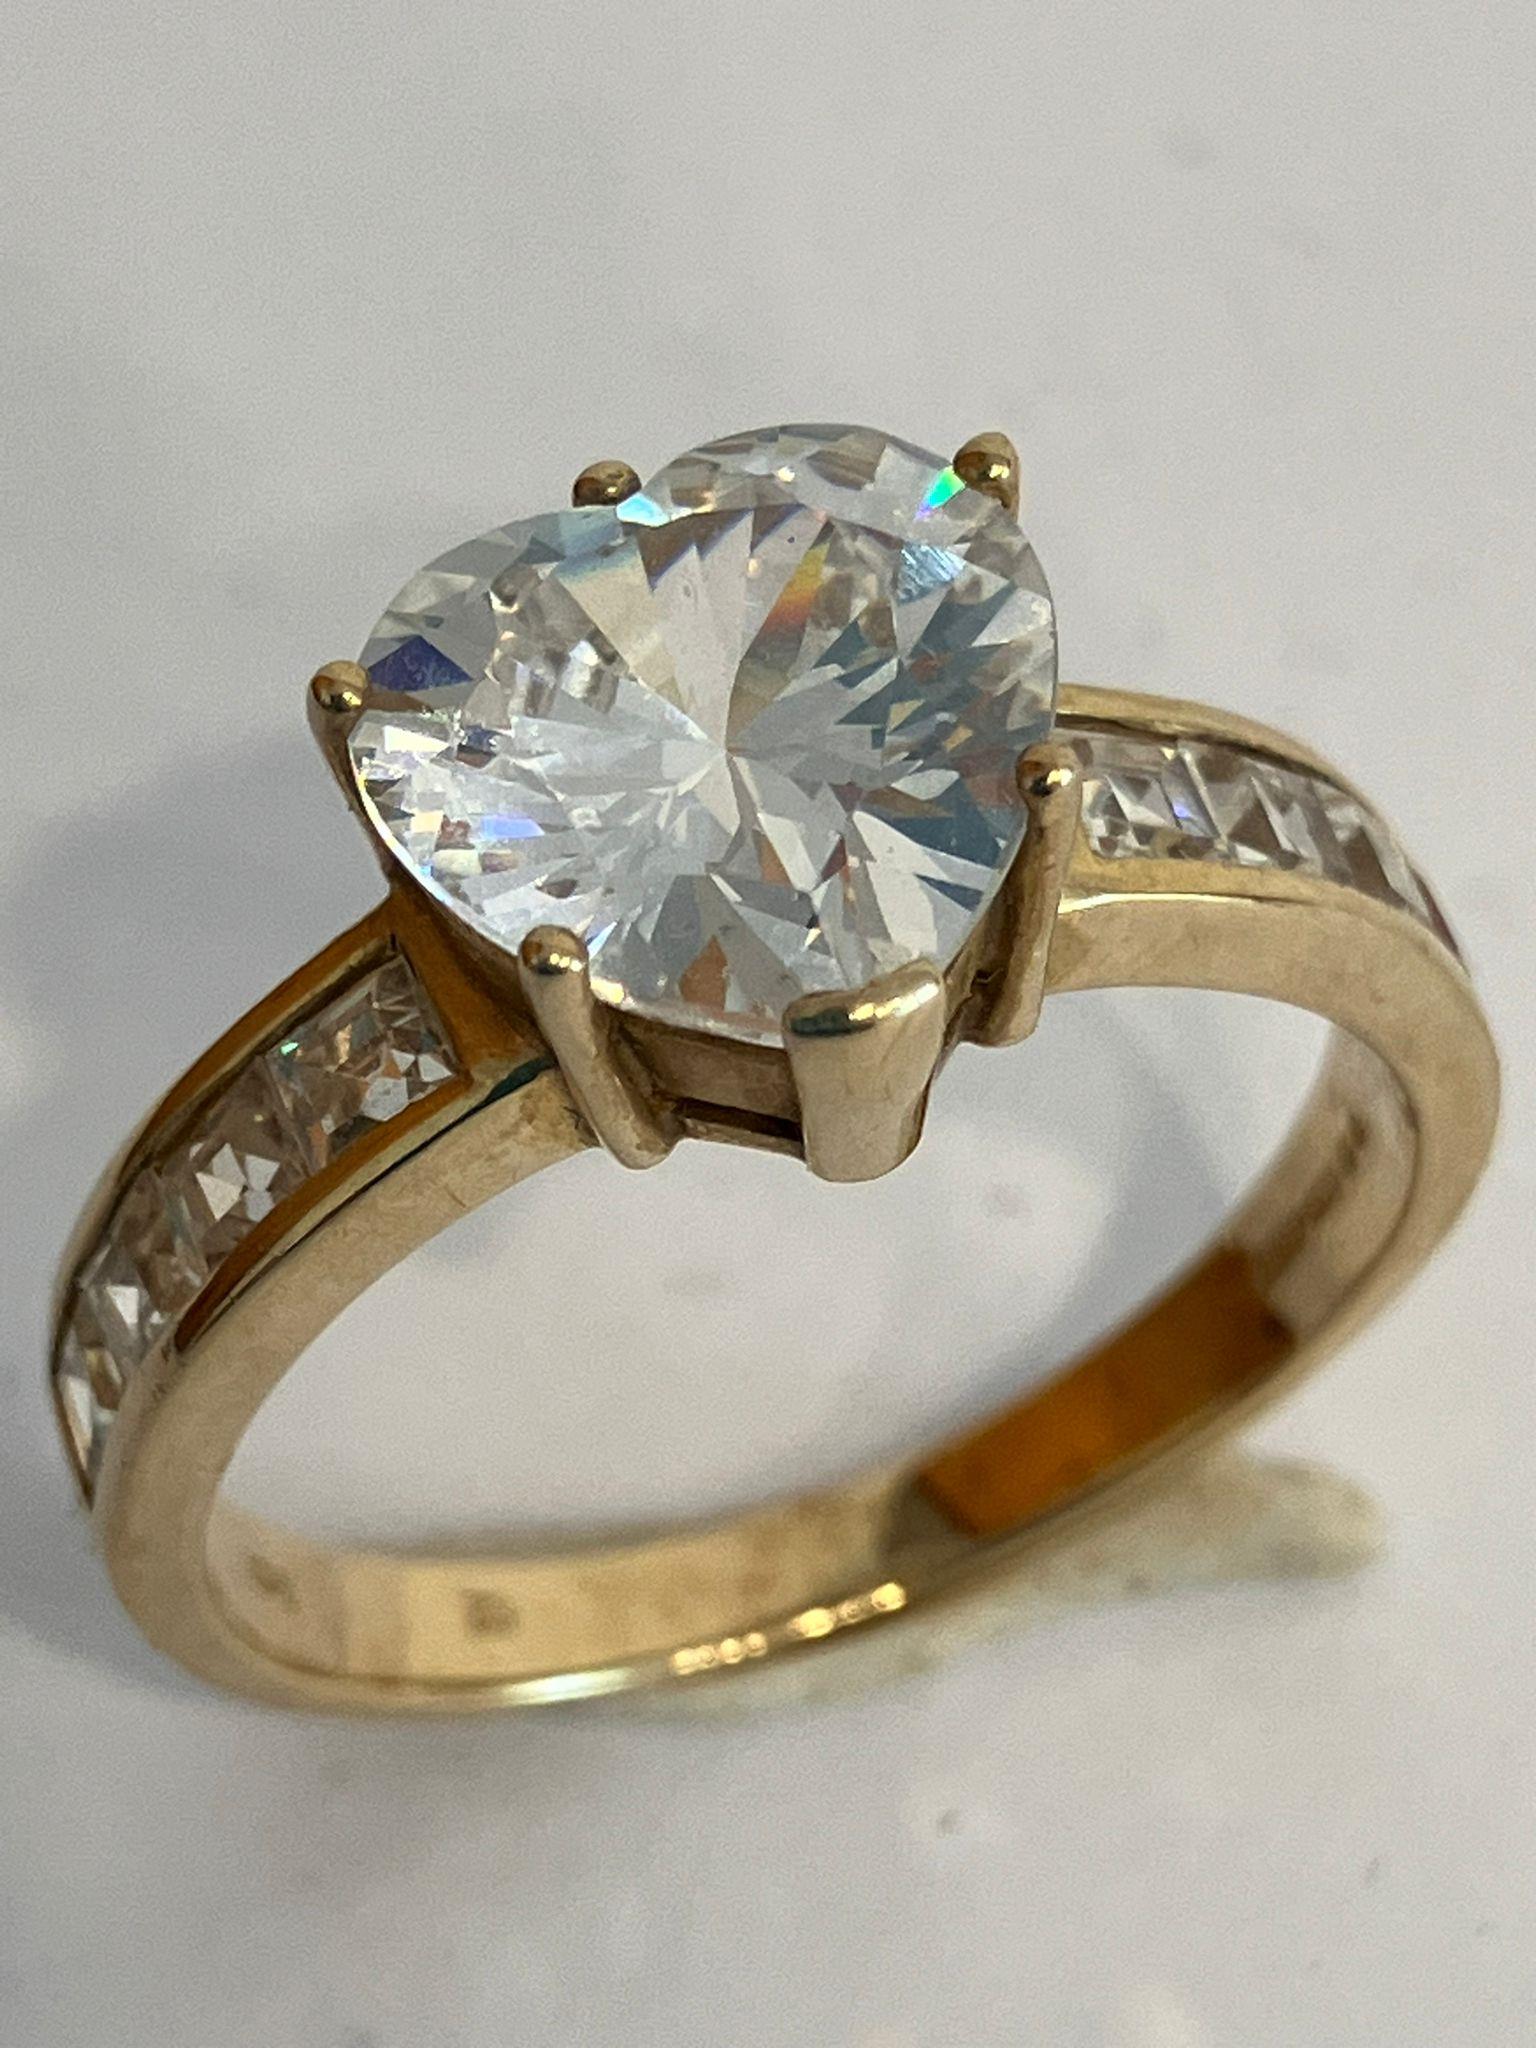 Fabulous 9 carat GOLD RING a with light-catching Zirconia Gemstone SOLITAIRE mounted to top. Full UK - Image 3 of 5